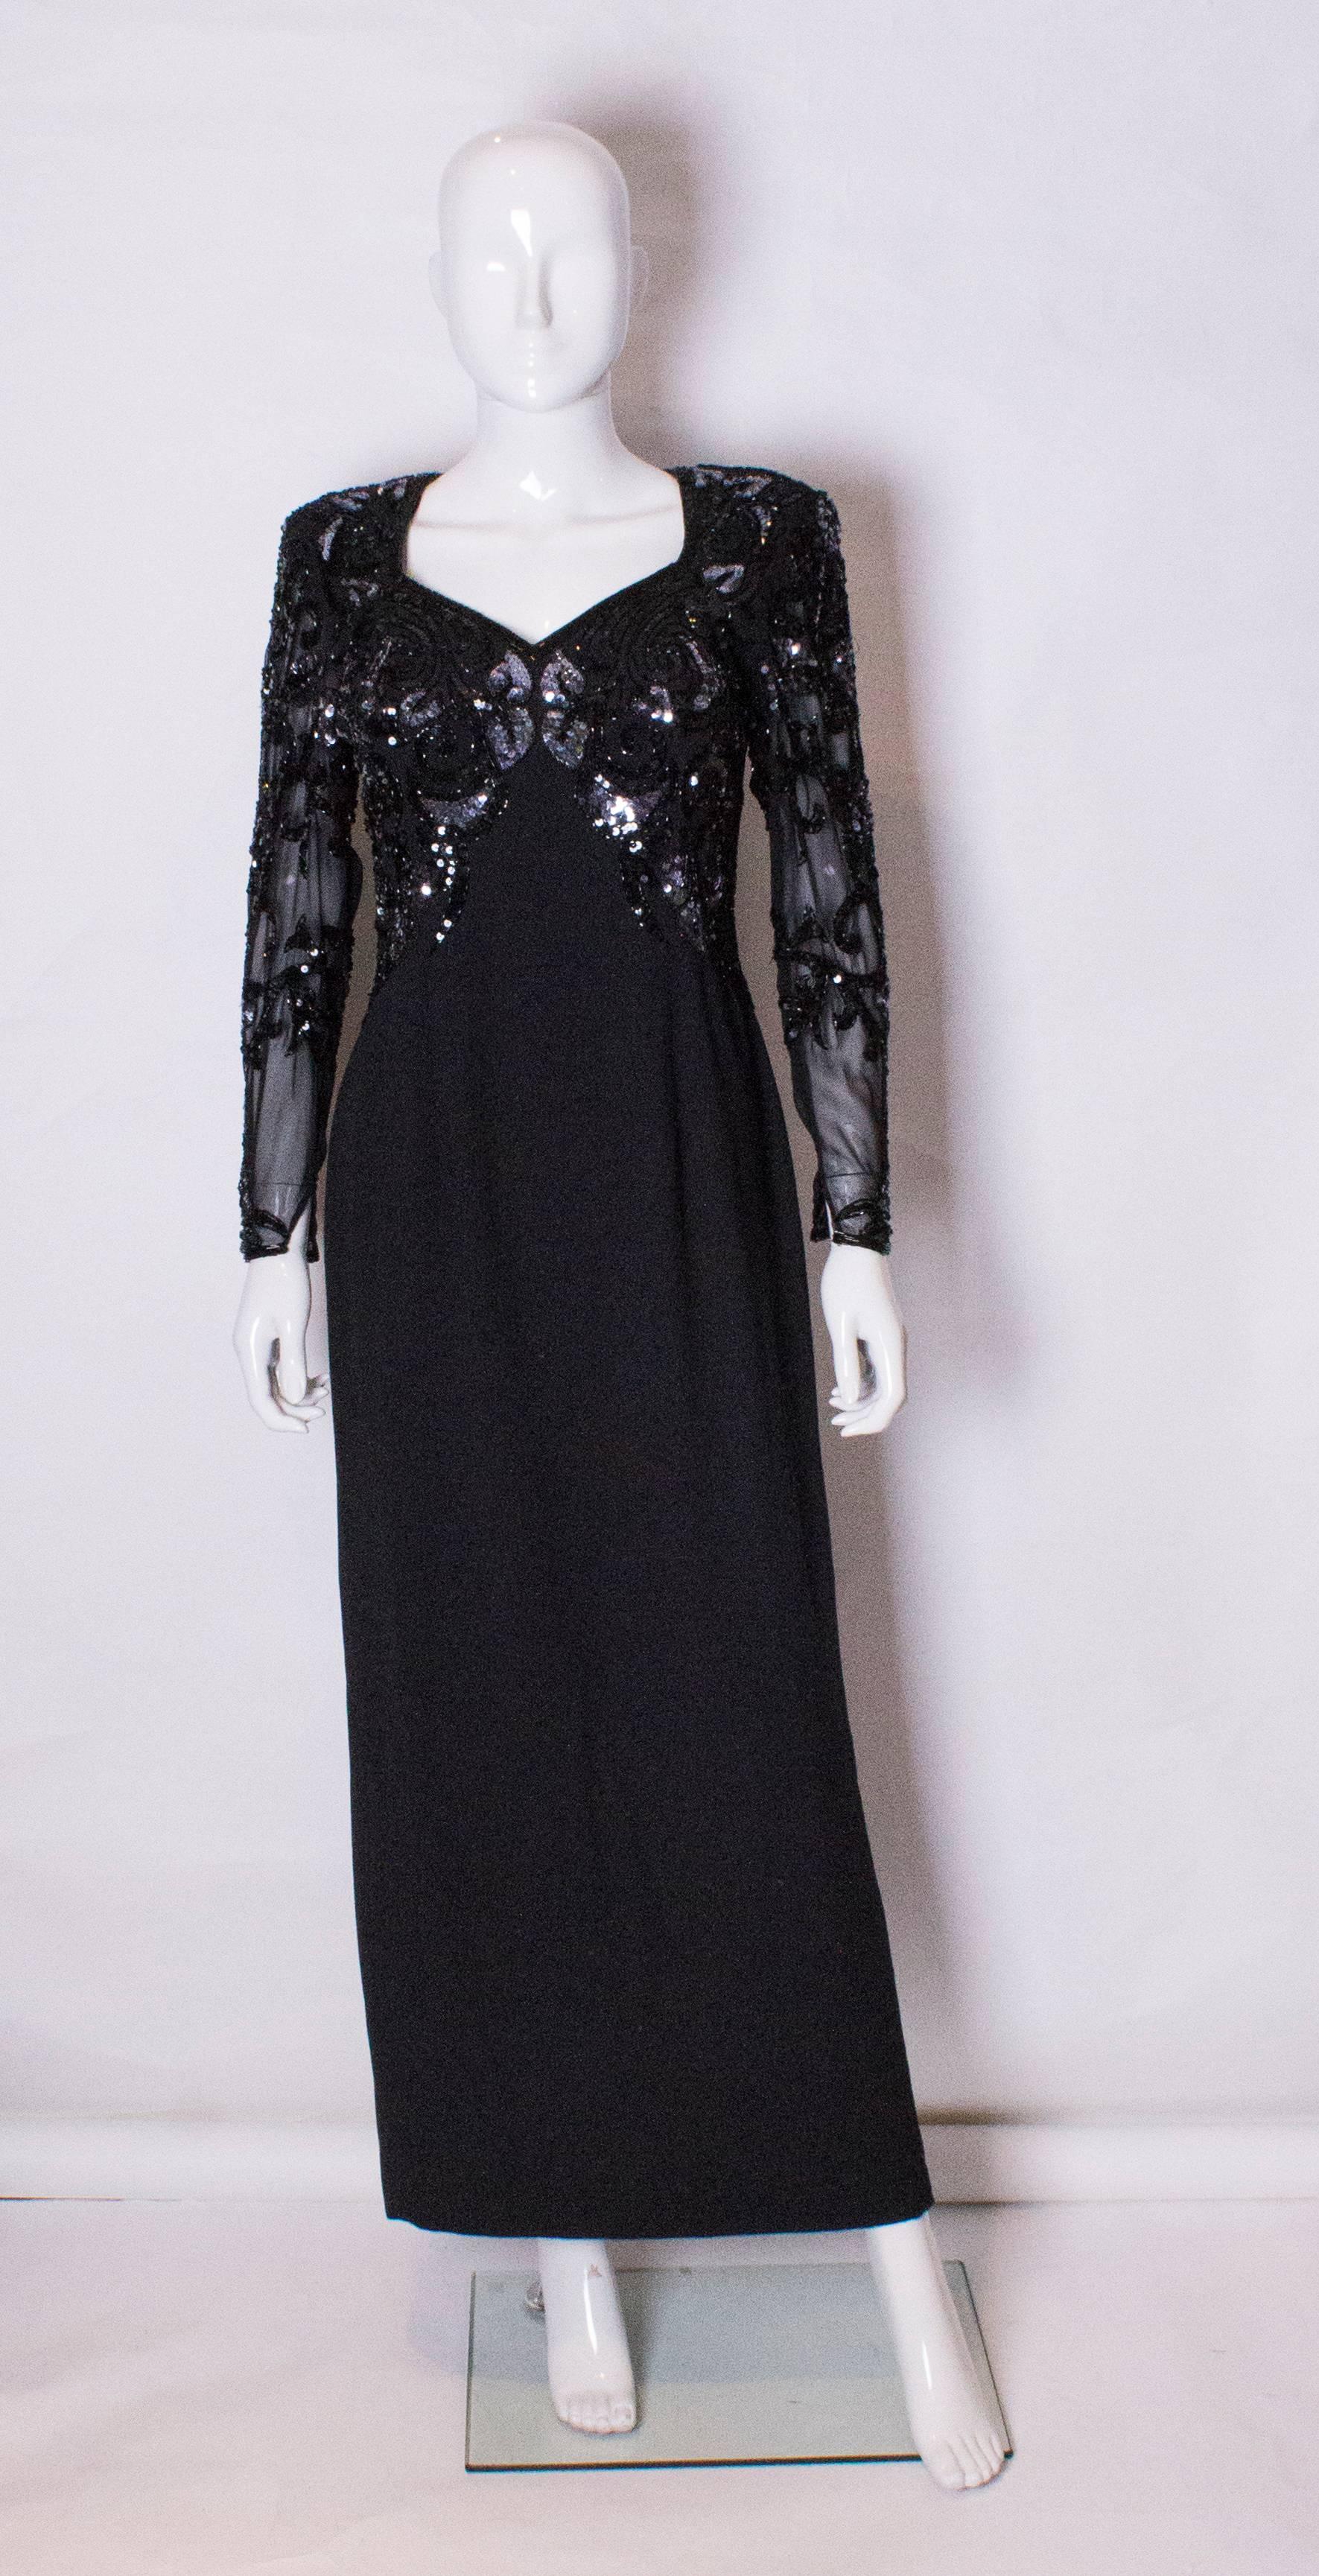 A stunning evening gown by British designer Frank Usher. The dress has a beautifuly beaded bodice on the front and back, and beaded sheer sleeves.
The dress has a central back zip, and a back keyhole opening.
